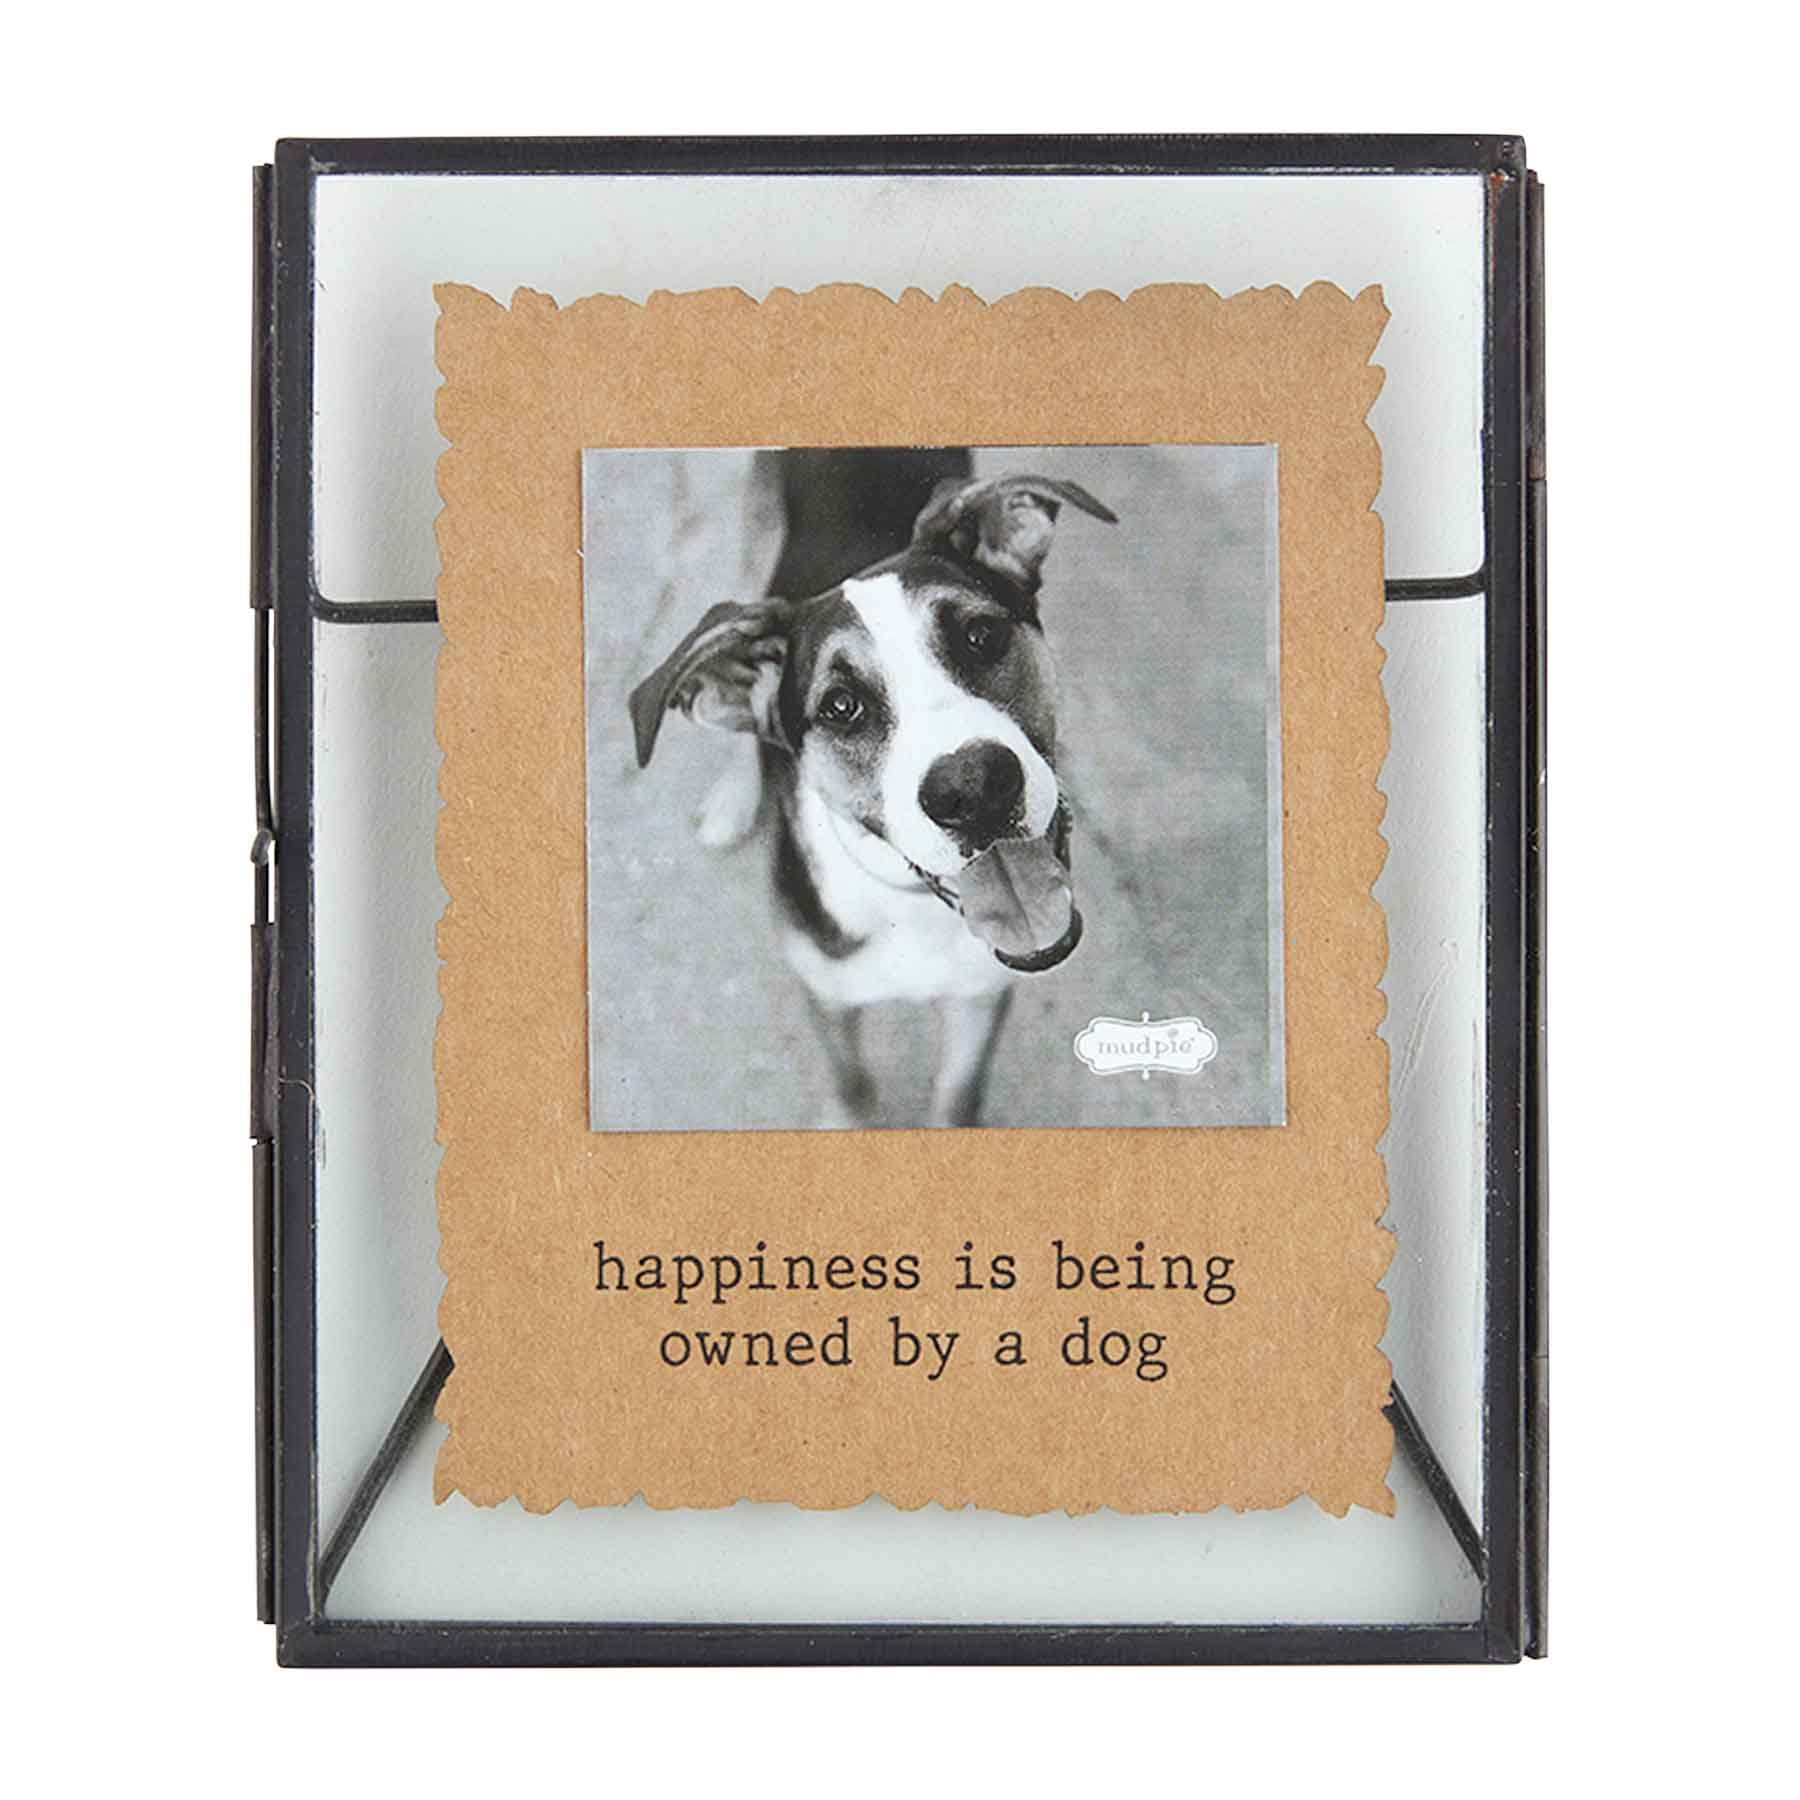 Mudpie HAPPINESS GLASS PET FRAME